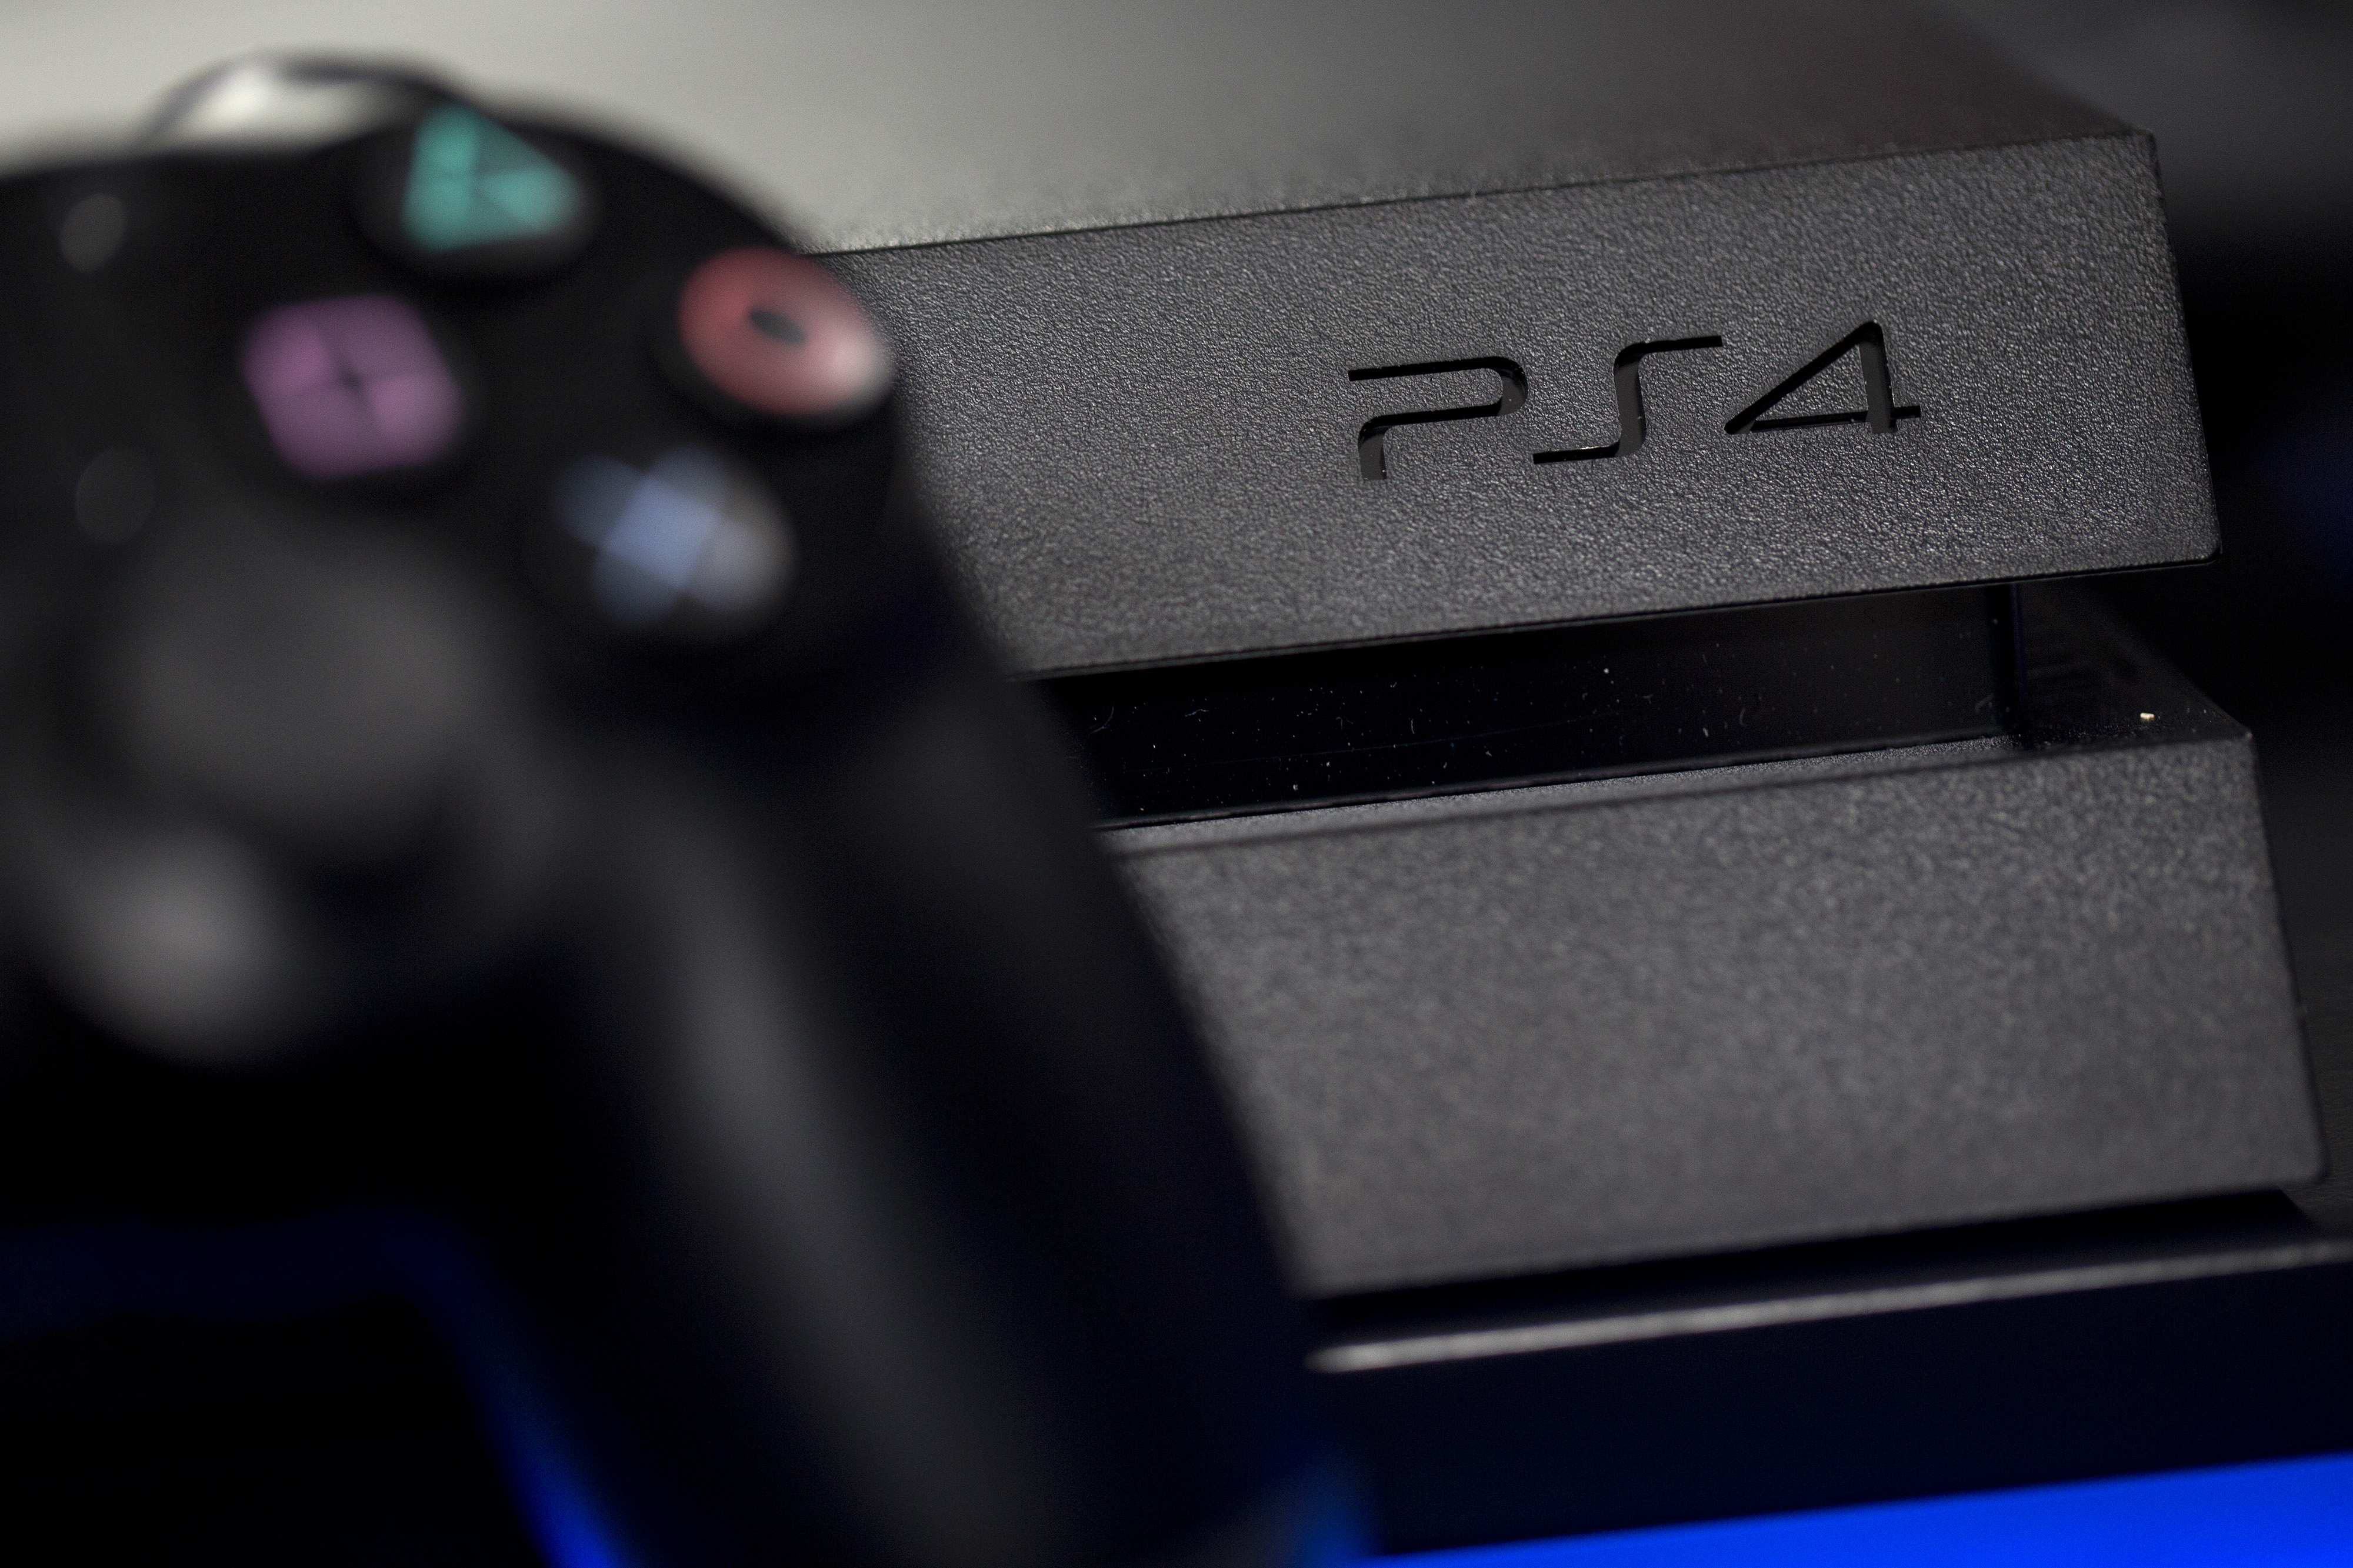 A logo sits on the front of a Sony PlayStation 4 (PS4) games console, manufactured by Sony Corp., in this arranged photograph taken in London, U.K., on Friday, Nov. 15, 2013. (Bloomberg—Getty Images)